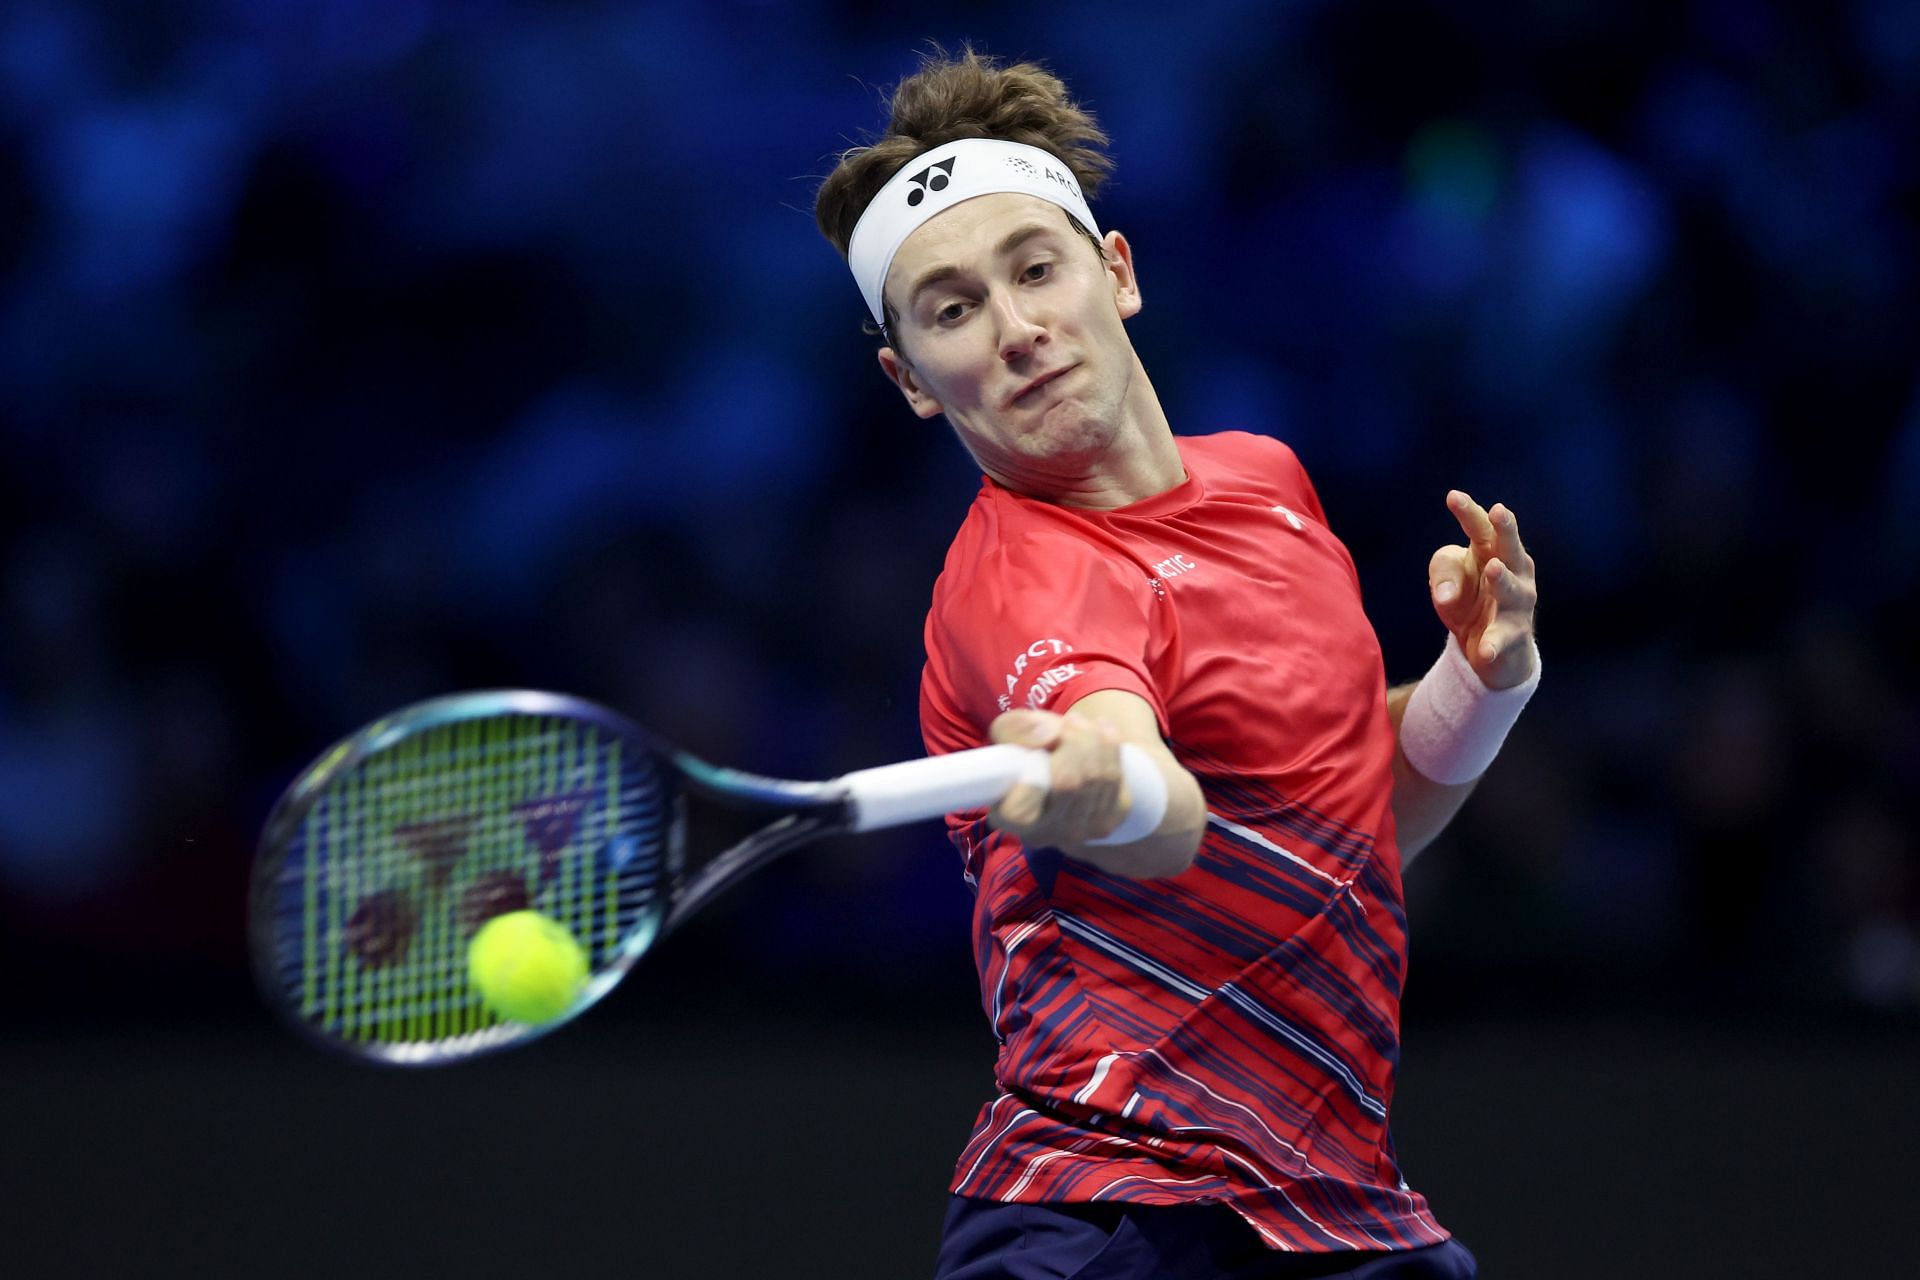 Casper Ruud in action at the 2022 ATP Finals in Turin.